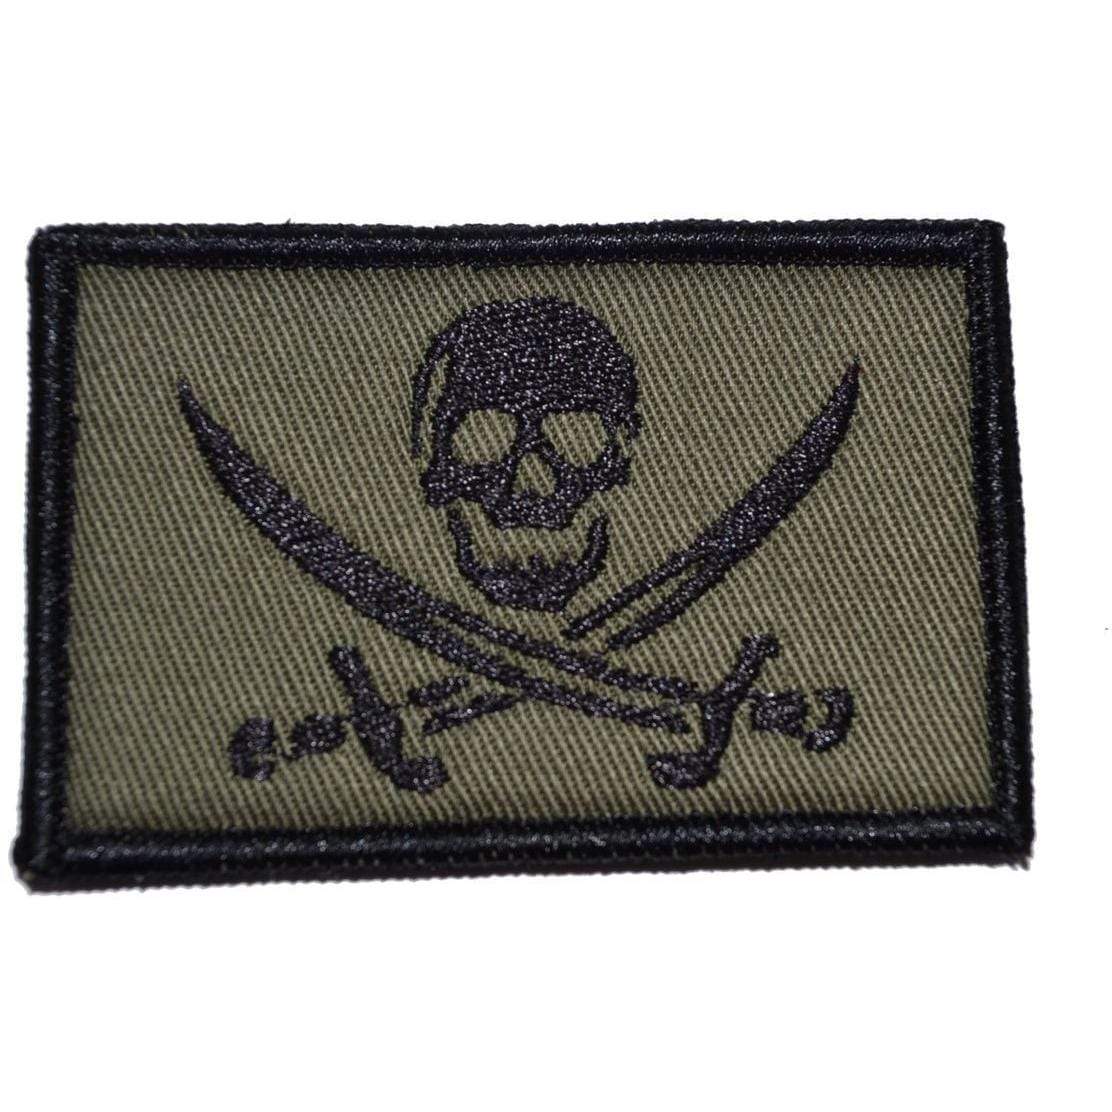 Tactical Gear Junkie Patches Olive Drab Pirate Jolly Roger - 2x3 Patch